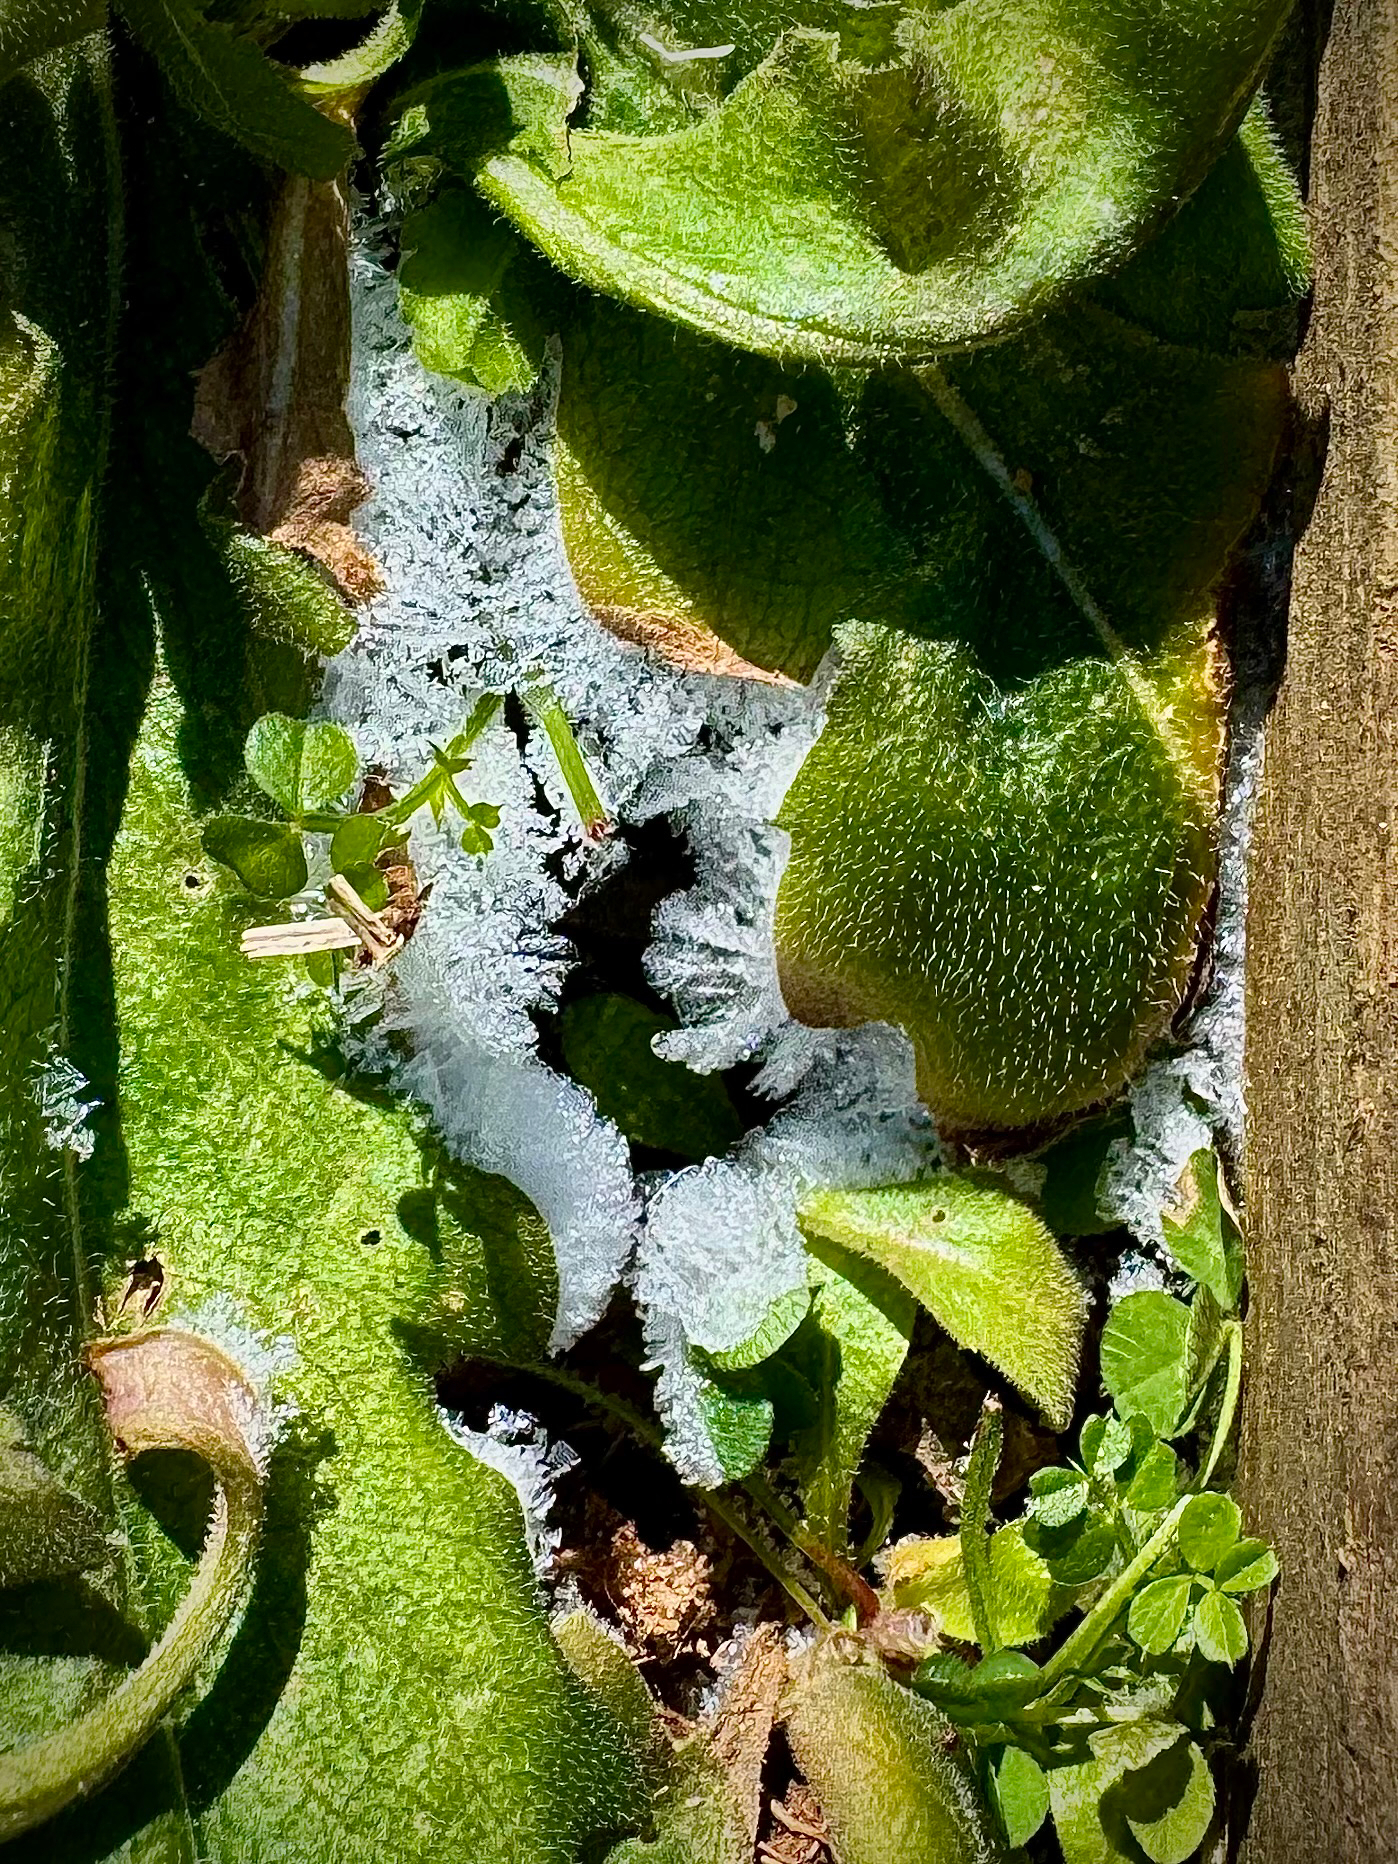 A macro photo of frost amongst some small ground scrub plants